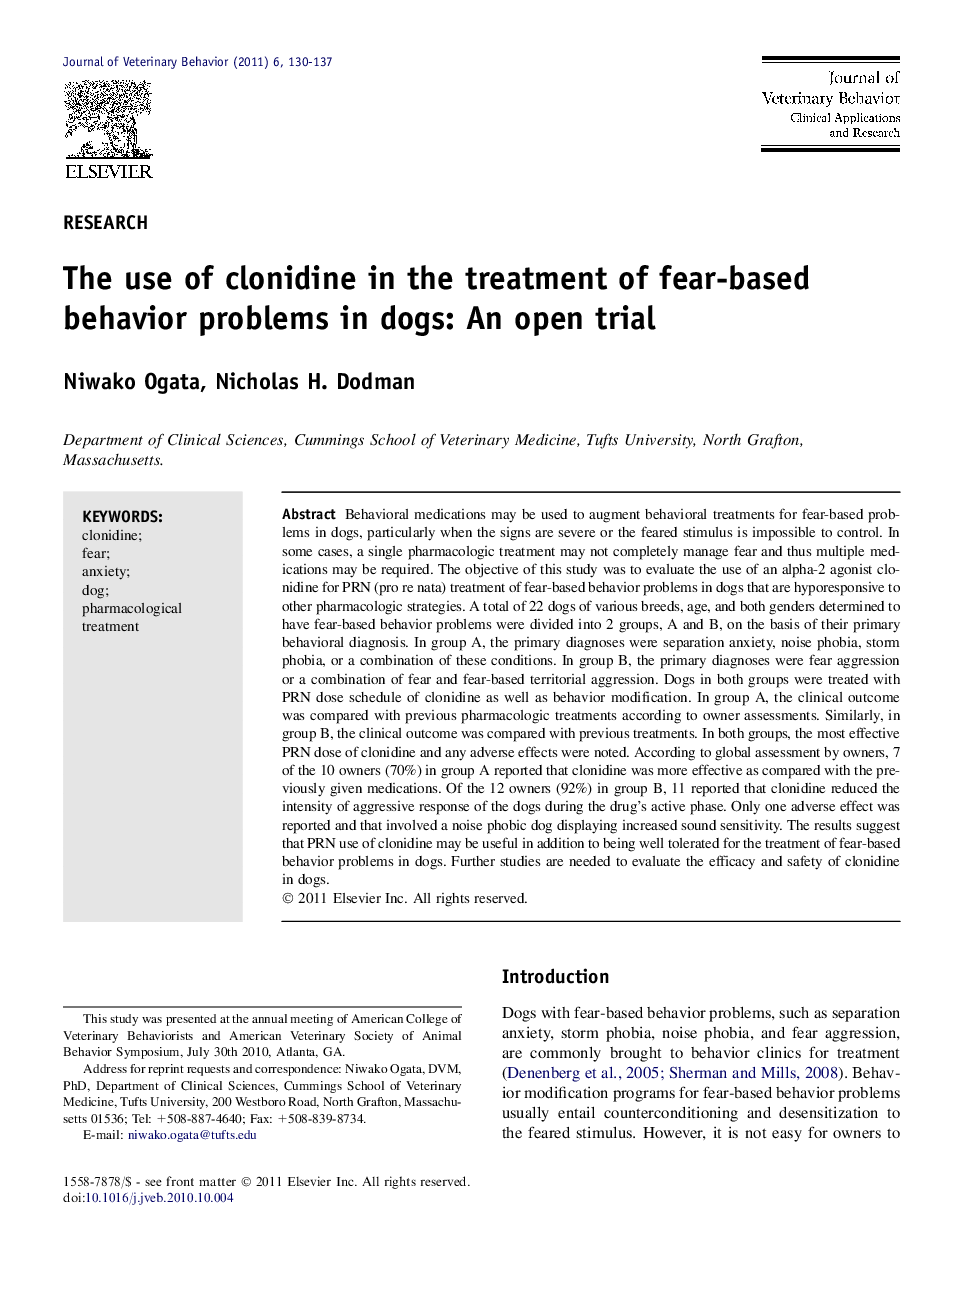 The use of clonidine in the treatment of fear-based behavior problems in dogs: An open trial